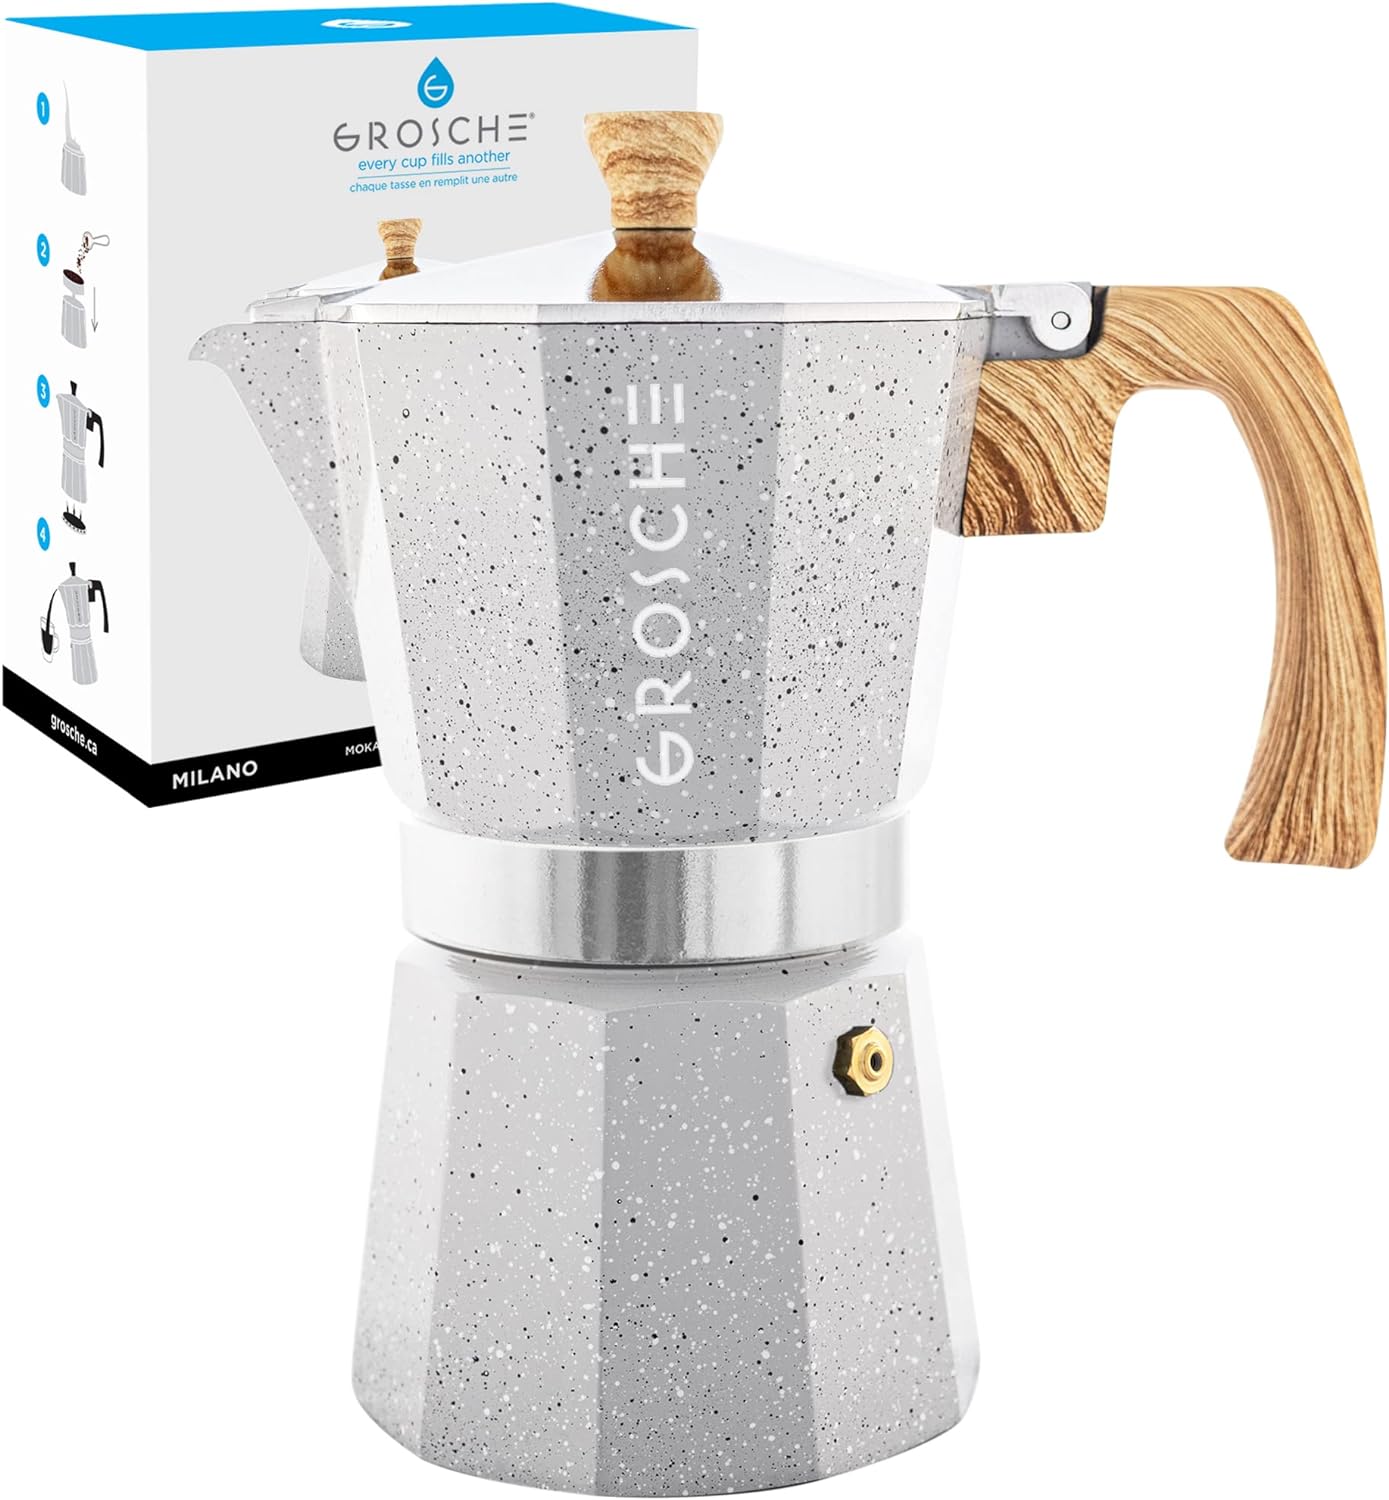 My wife and I have been using stove top espresso makers off and on for some years. For the last two years, I've been using a stove top espresso maker daily (started out years ago with a Bialetti moka pot, more recently no-name knockoffs). Just over 3 months ago I was shopping a stovetop espresso maker for my wife after her prior one met an unfortunate demise. Since this was going to be a surprise gift, I decided to upgrade to a proper current unit. I combed through some reviews, and Grosche' Mi